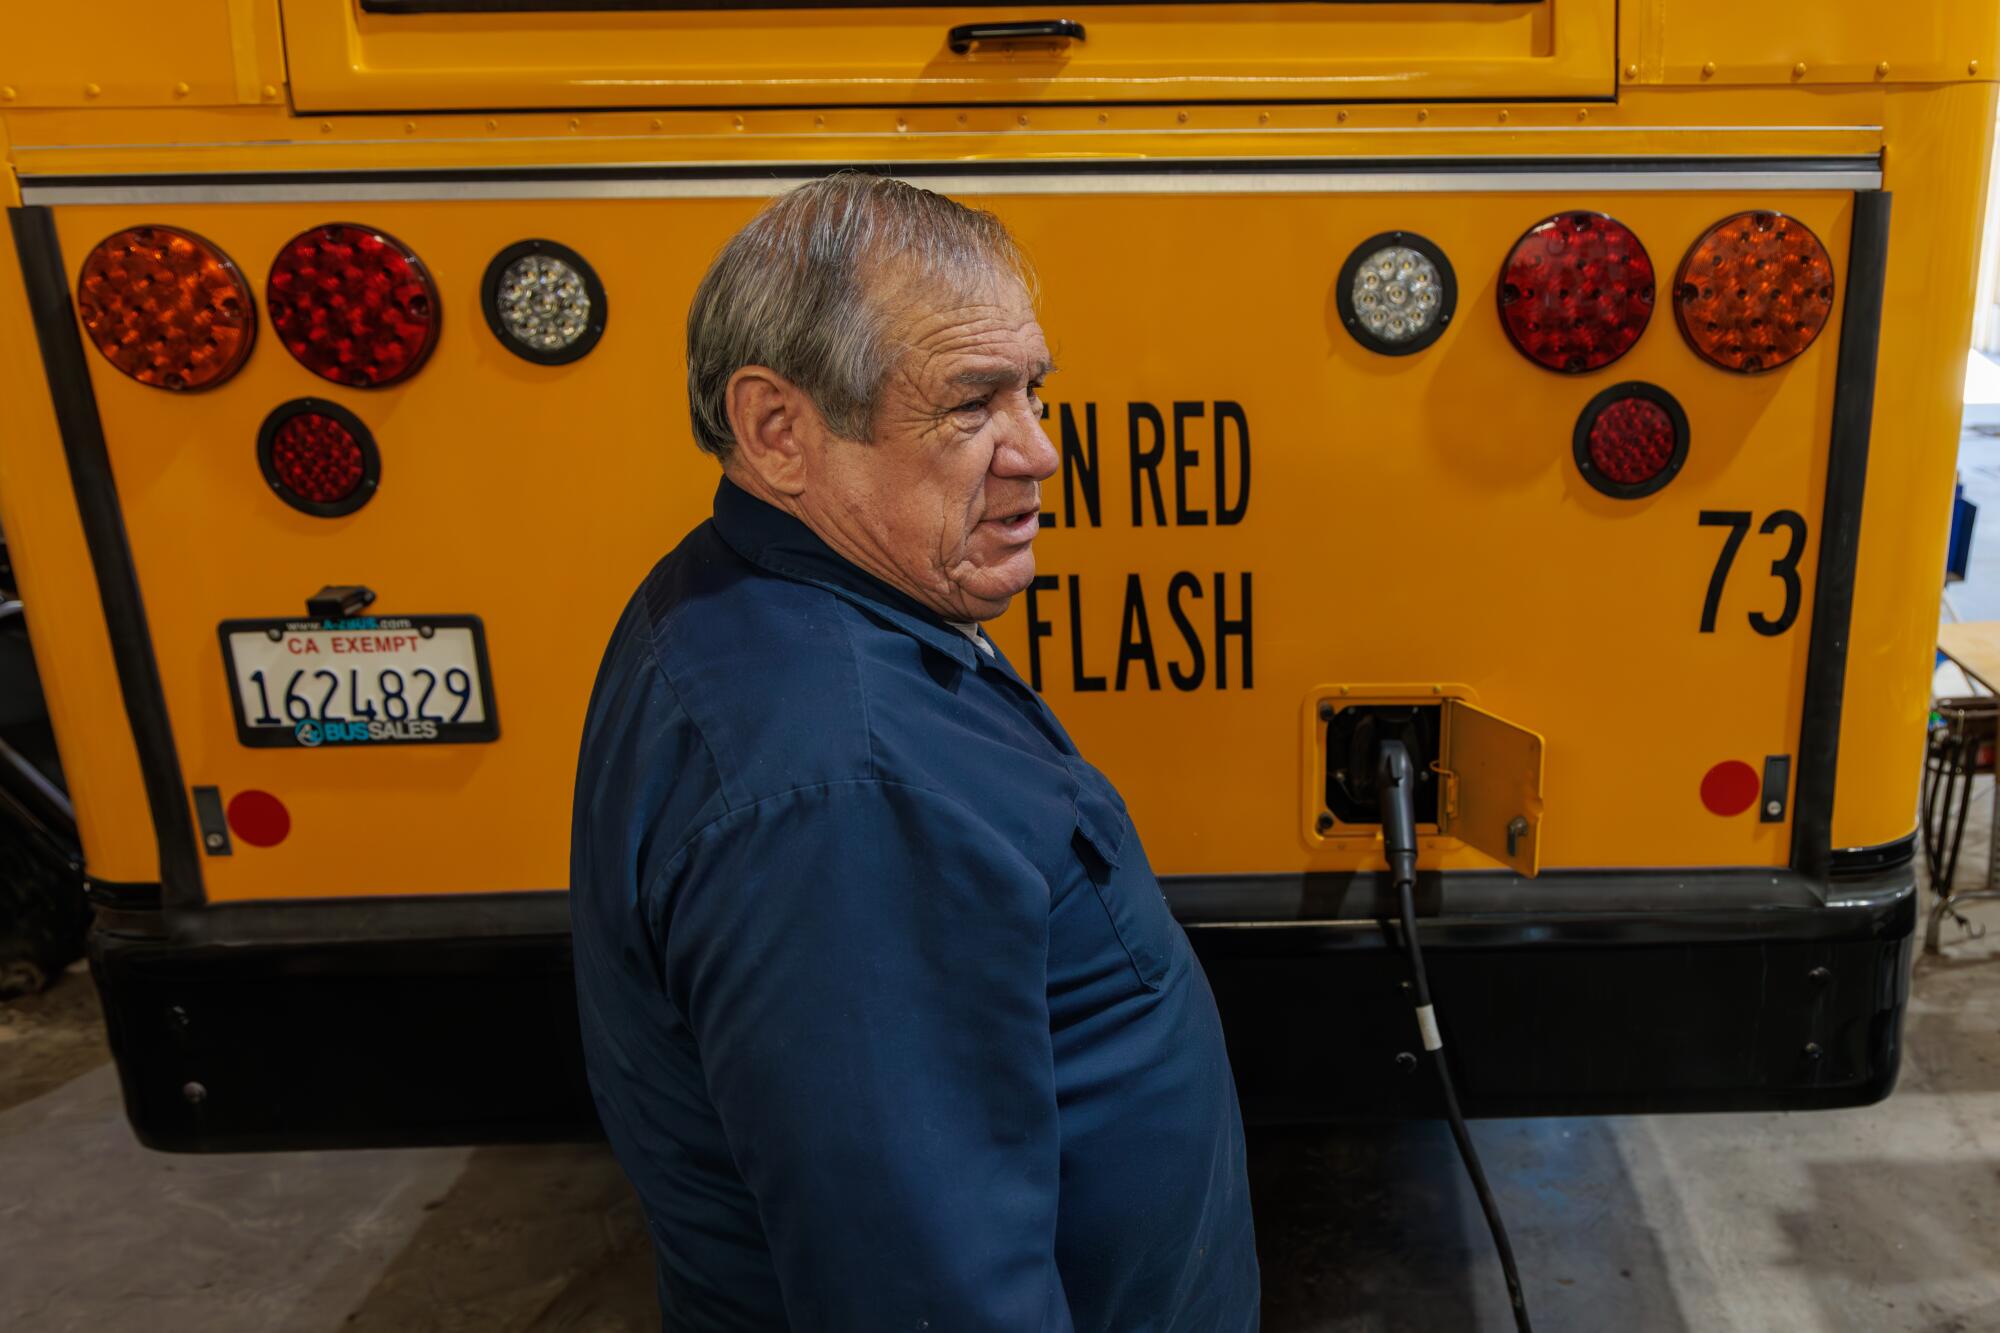 A man stands at the rear of school bus where a charging cable is connected.